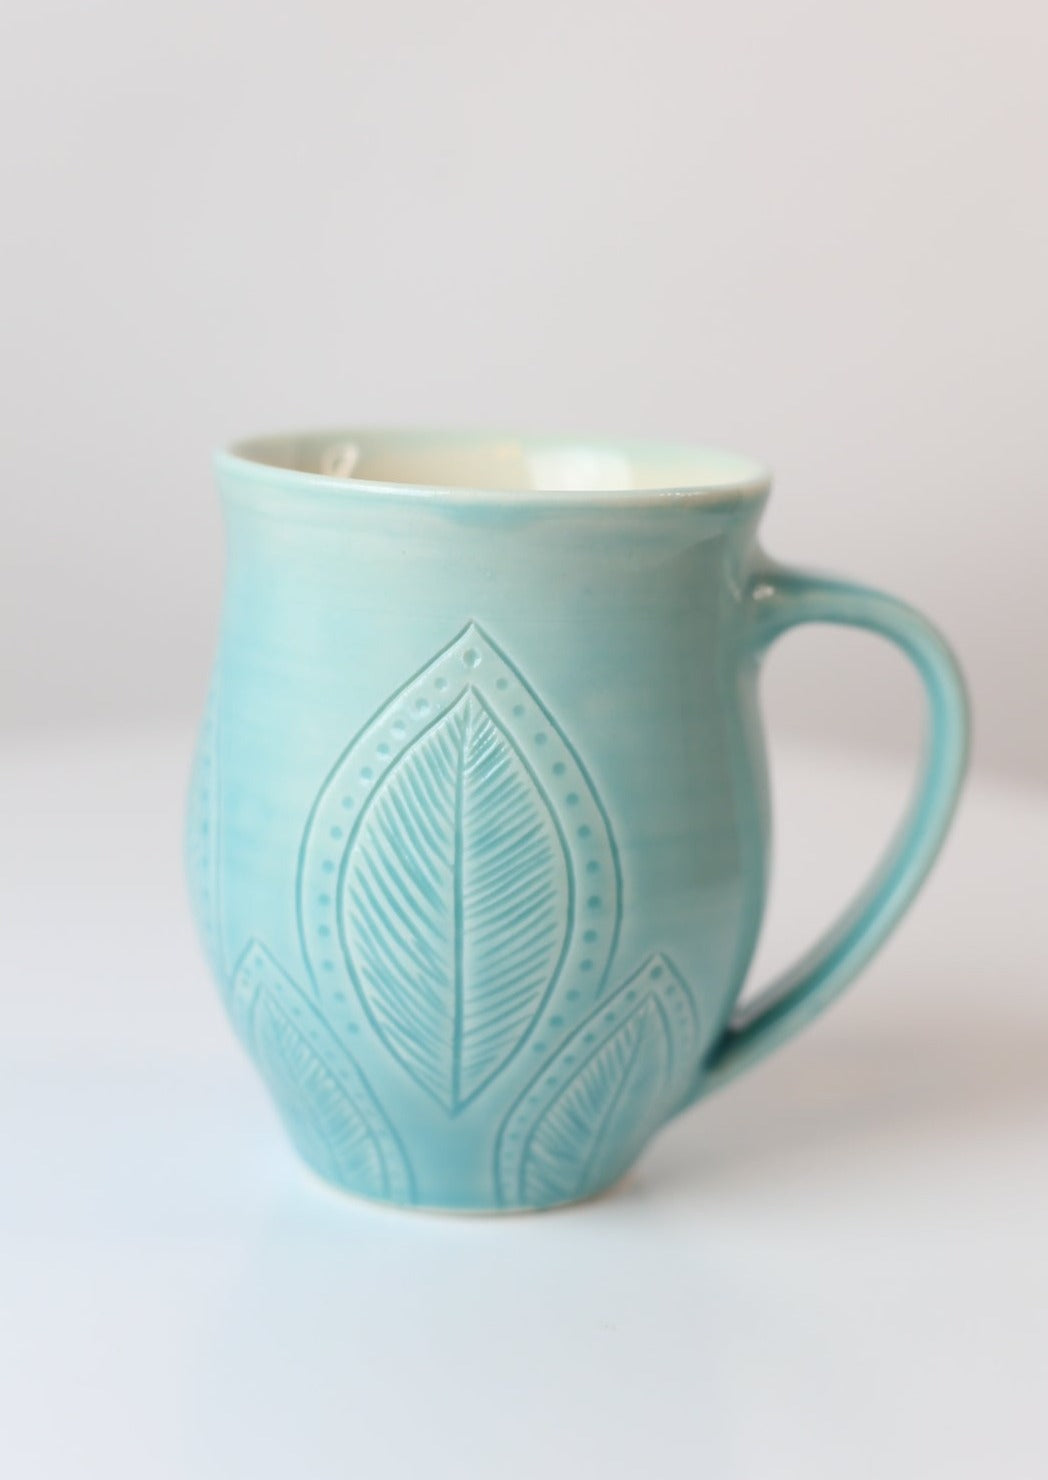 12oz porcelain mug with feather leaf design in turquoise